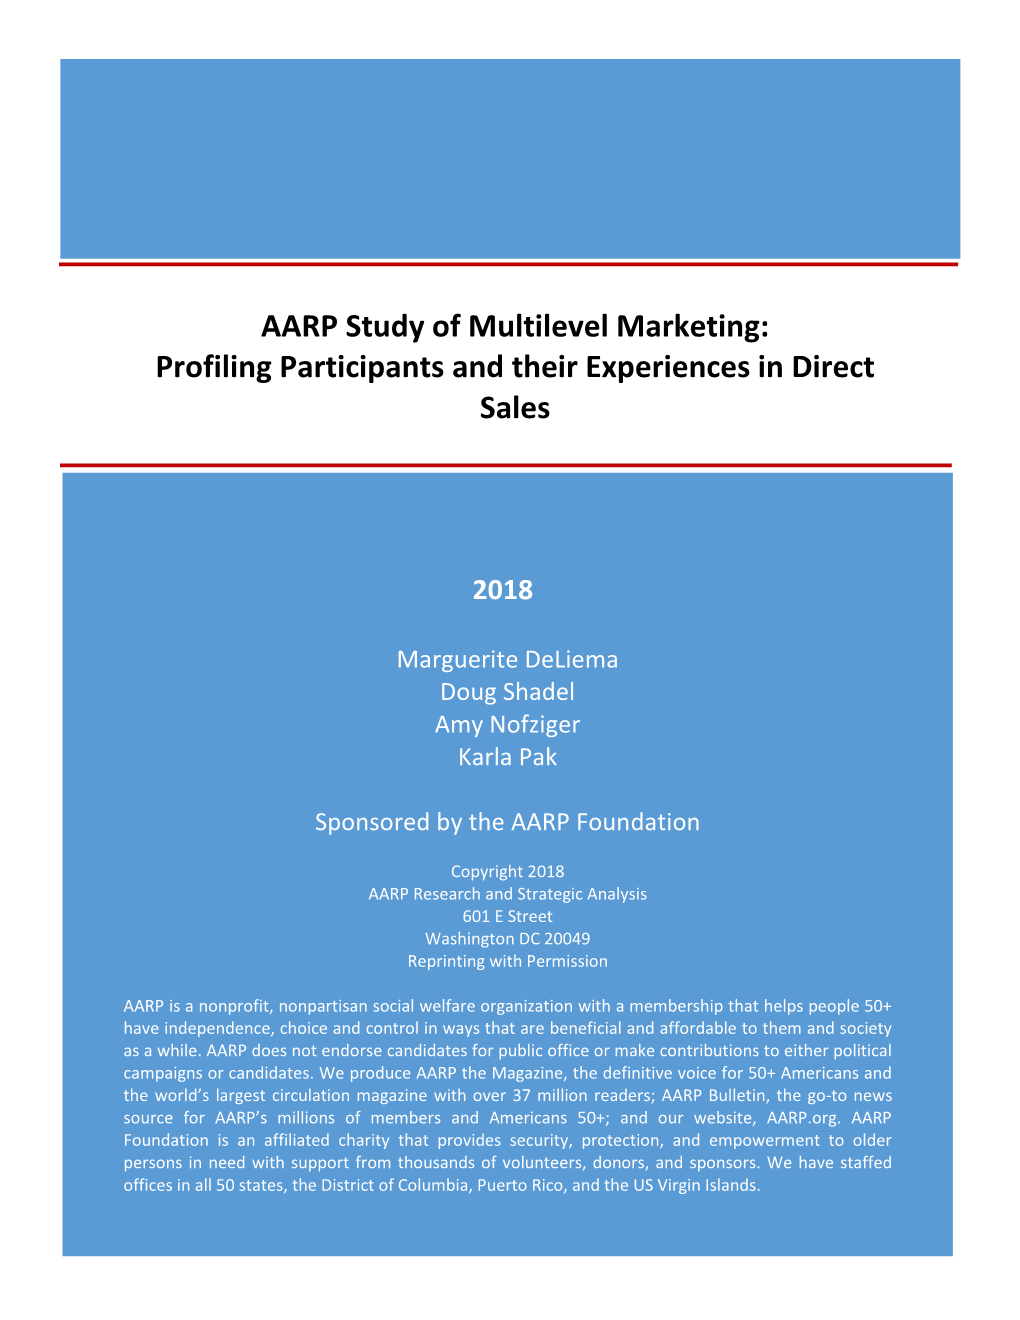 AARP Study of Multilevel Marketing: Profiling Participants and Their Experiences in Direct Sales